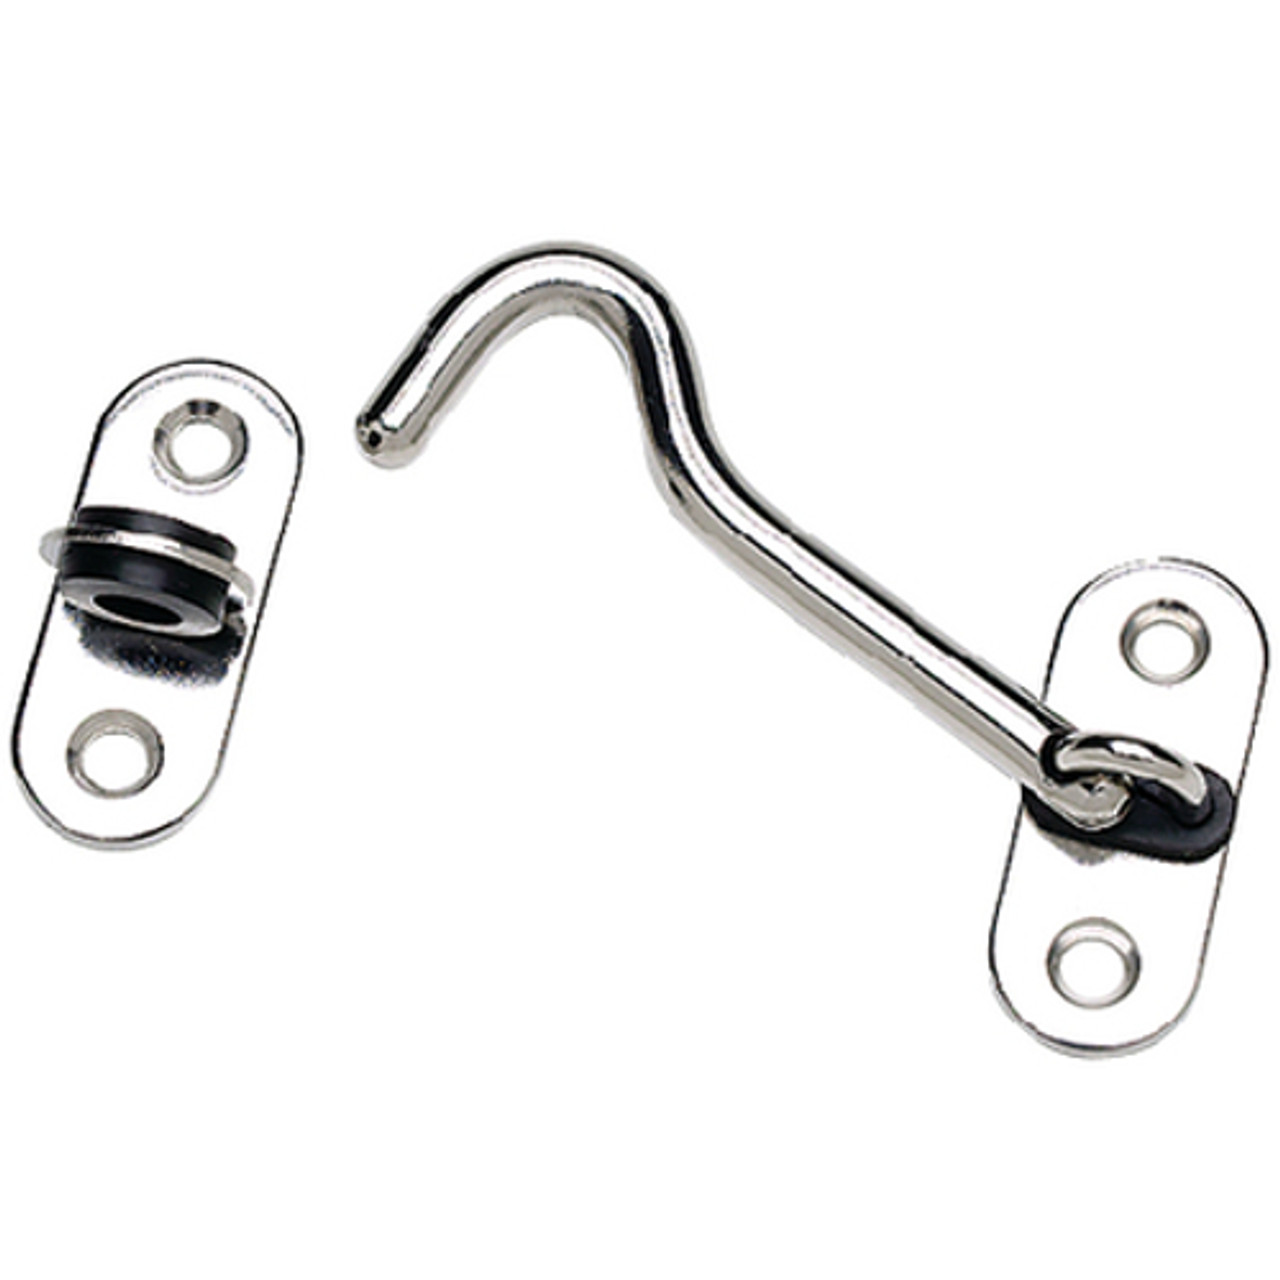 3 Inch 304 Stainless Steel Cabin Door Hook for Boats, RVs and More